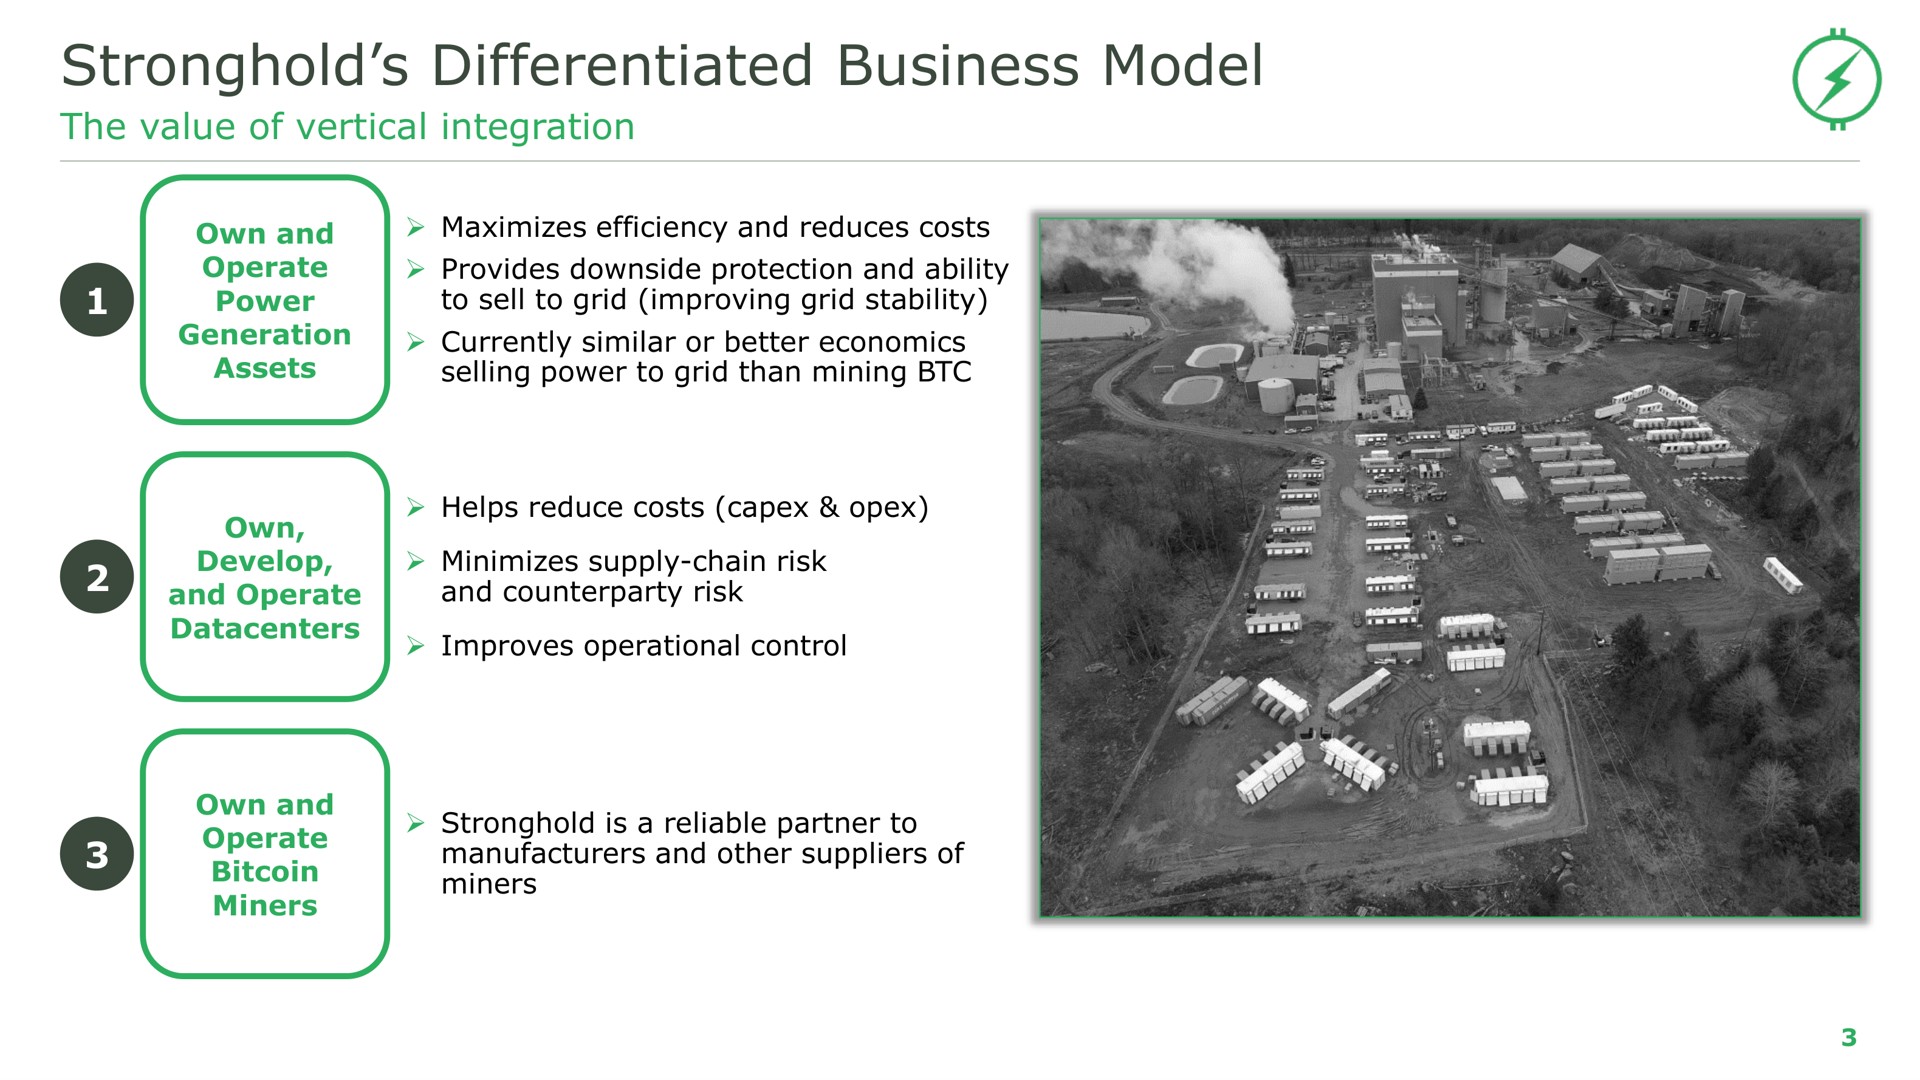 stronghold differentiated business model | Stronghold Digital Mining